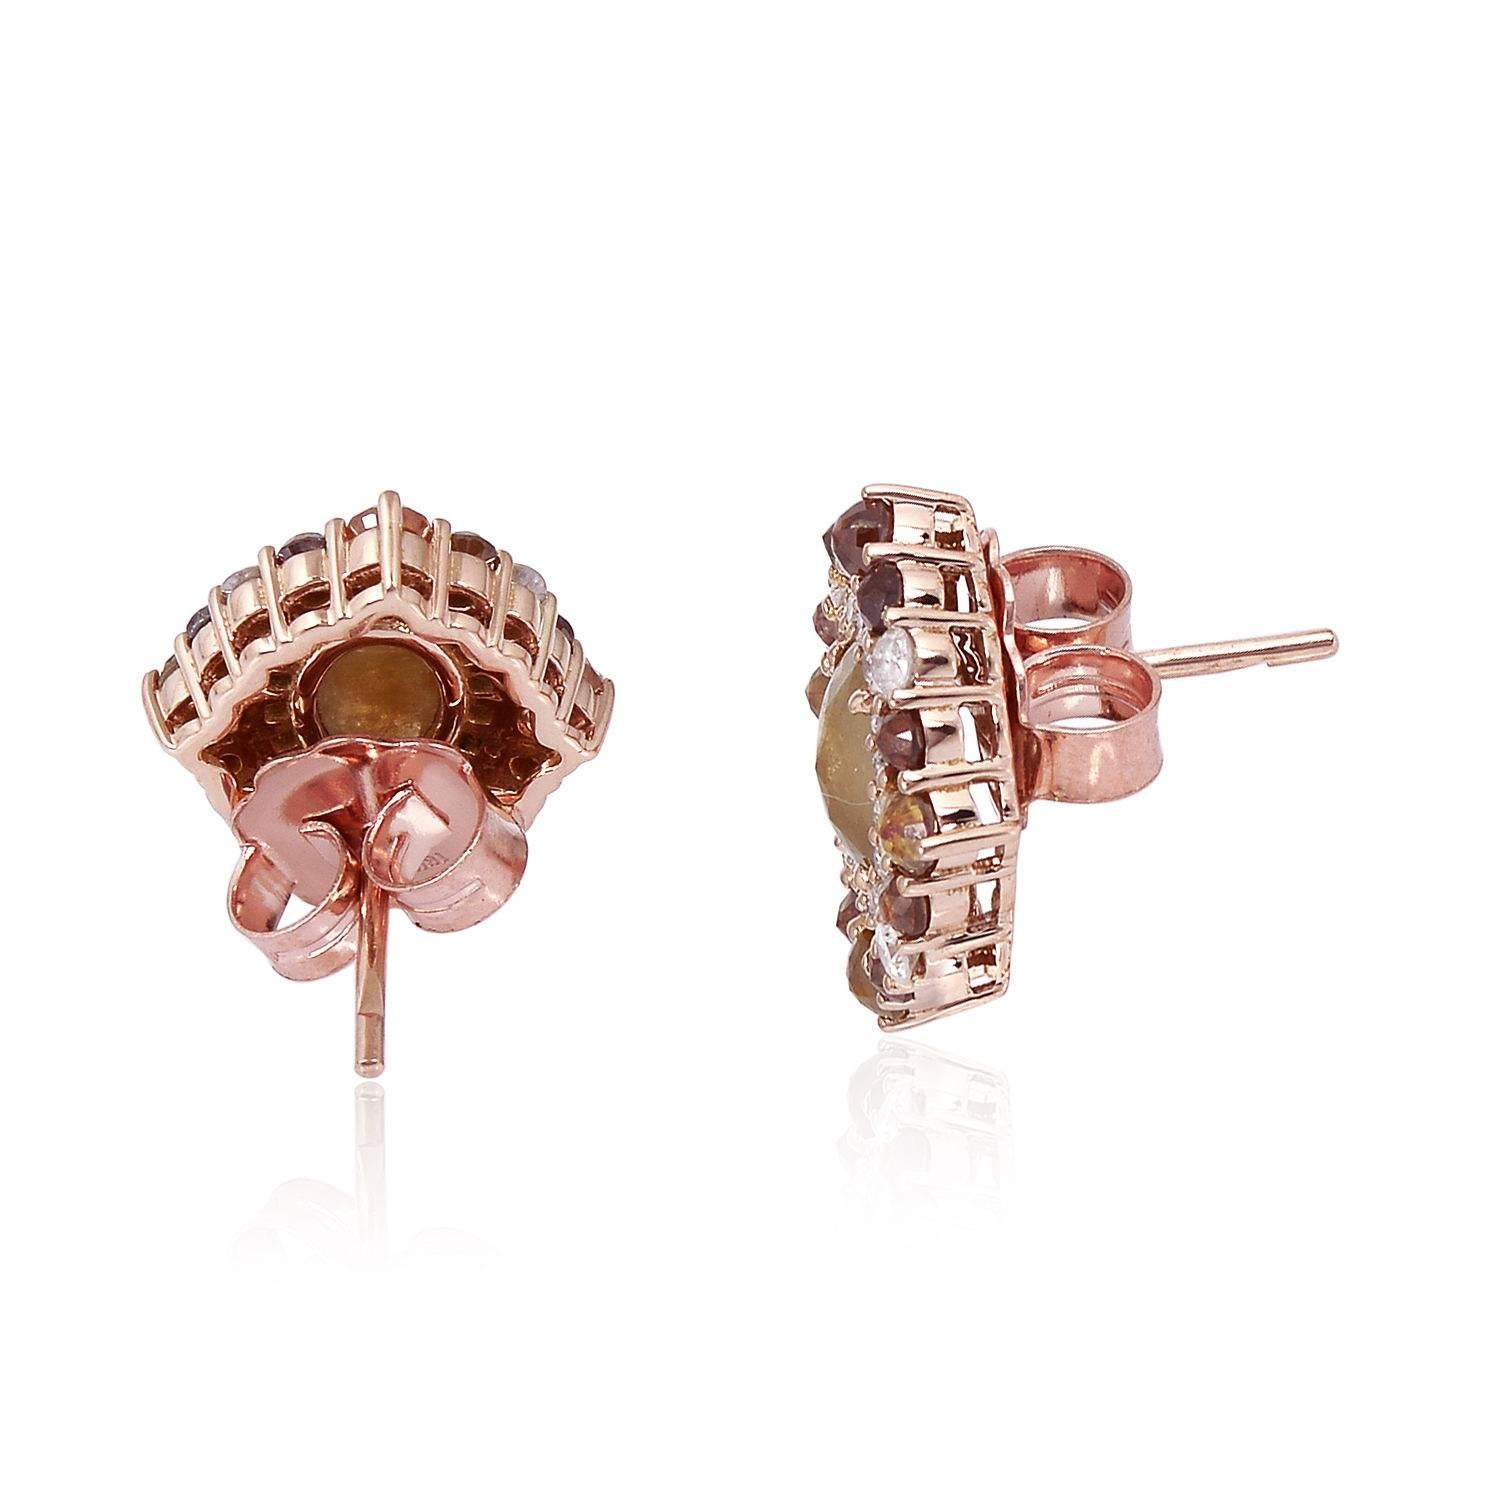 This charming shades of brown Cluster Ice Diamond Stud Earring in 18K Yellow Gold will not you go unnoticed. Wear it with your formals or casuals, so pretty!
Closure: Push & Post
18k:5.99g
Diamond:3.42ct